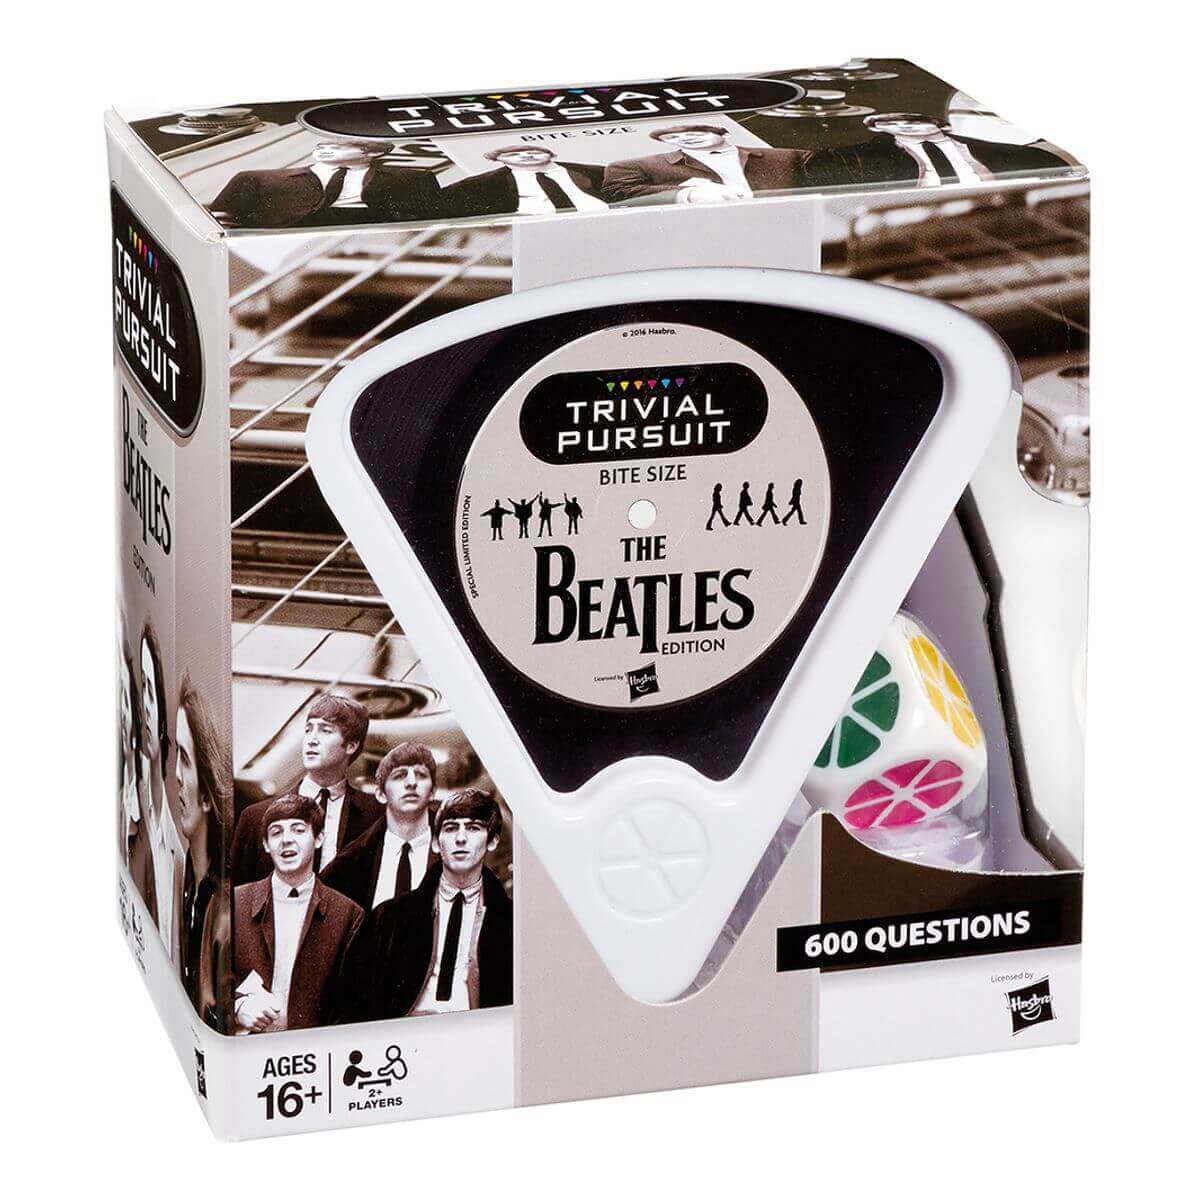 The Beatles Trivial Pursuit Knowledge Card Game